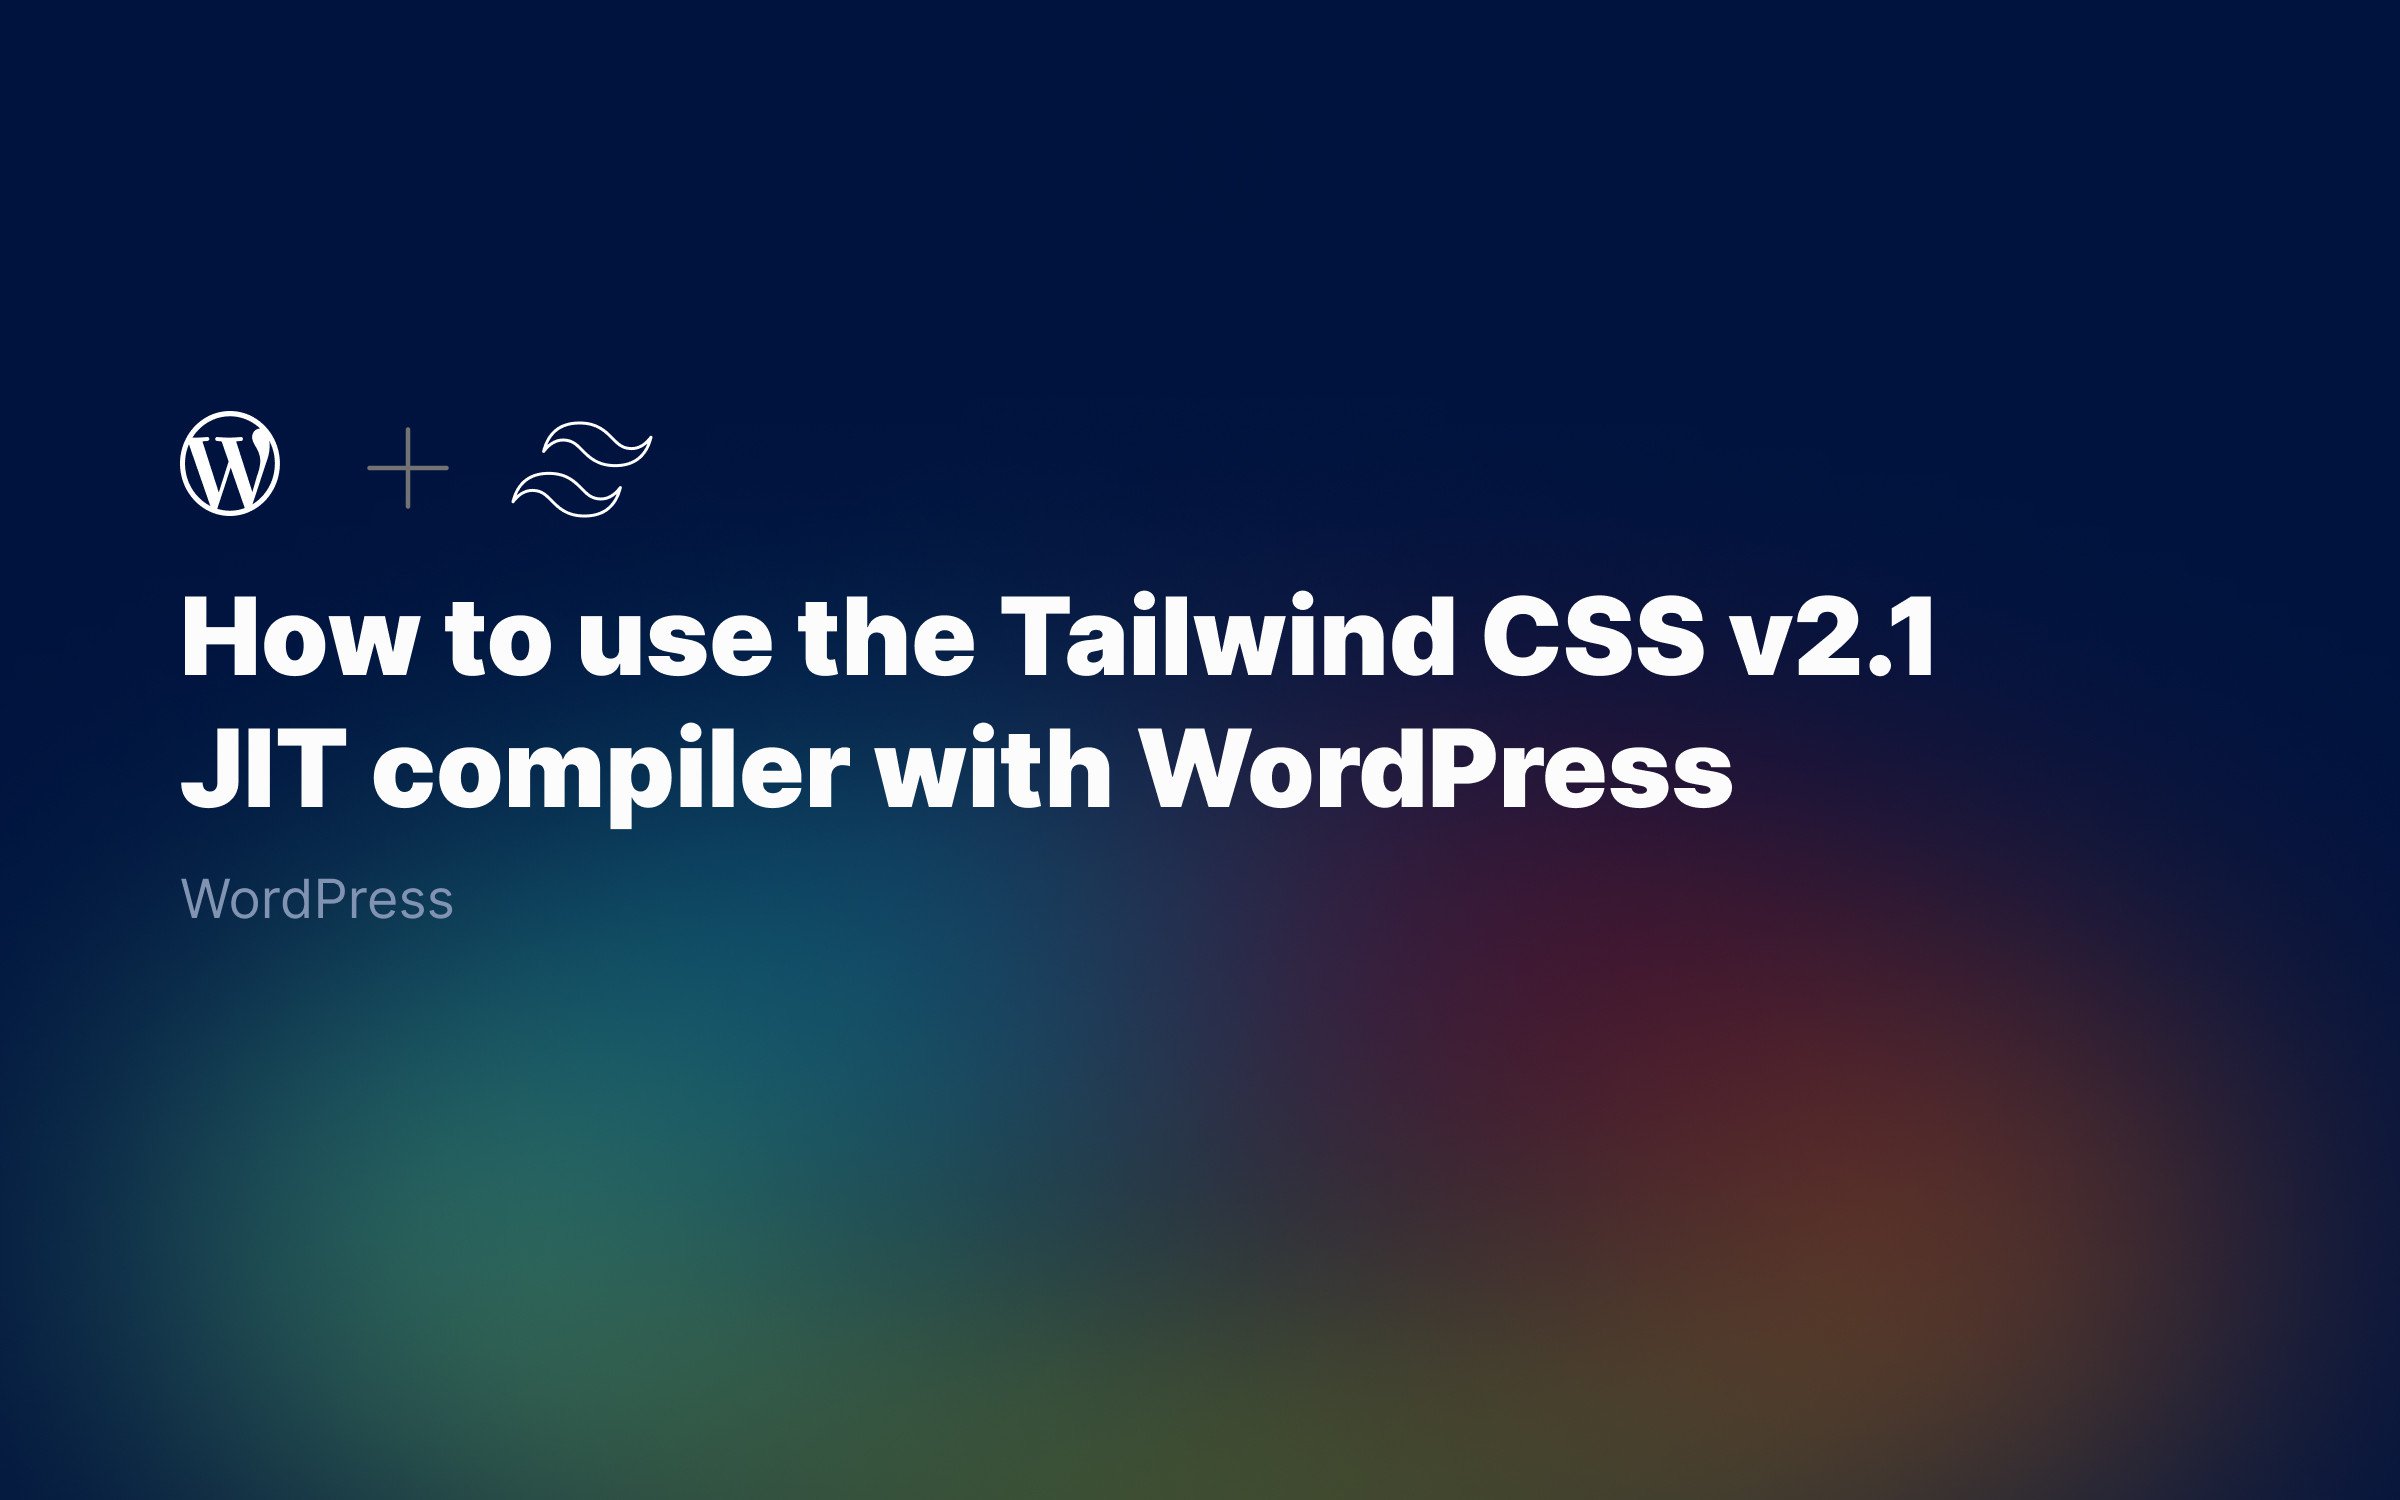 How to use Tailwind CSS v2.1 JIT compiler with WordPress theme (2021)